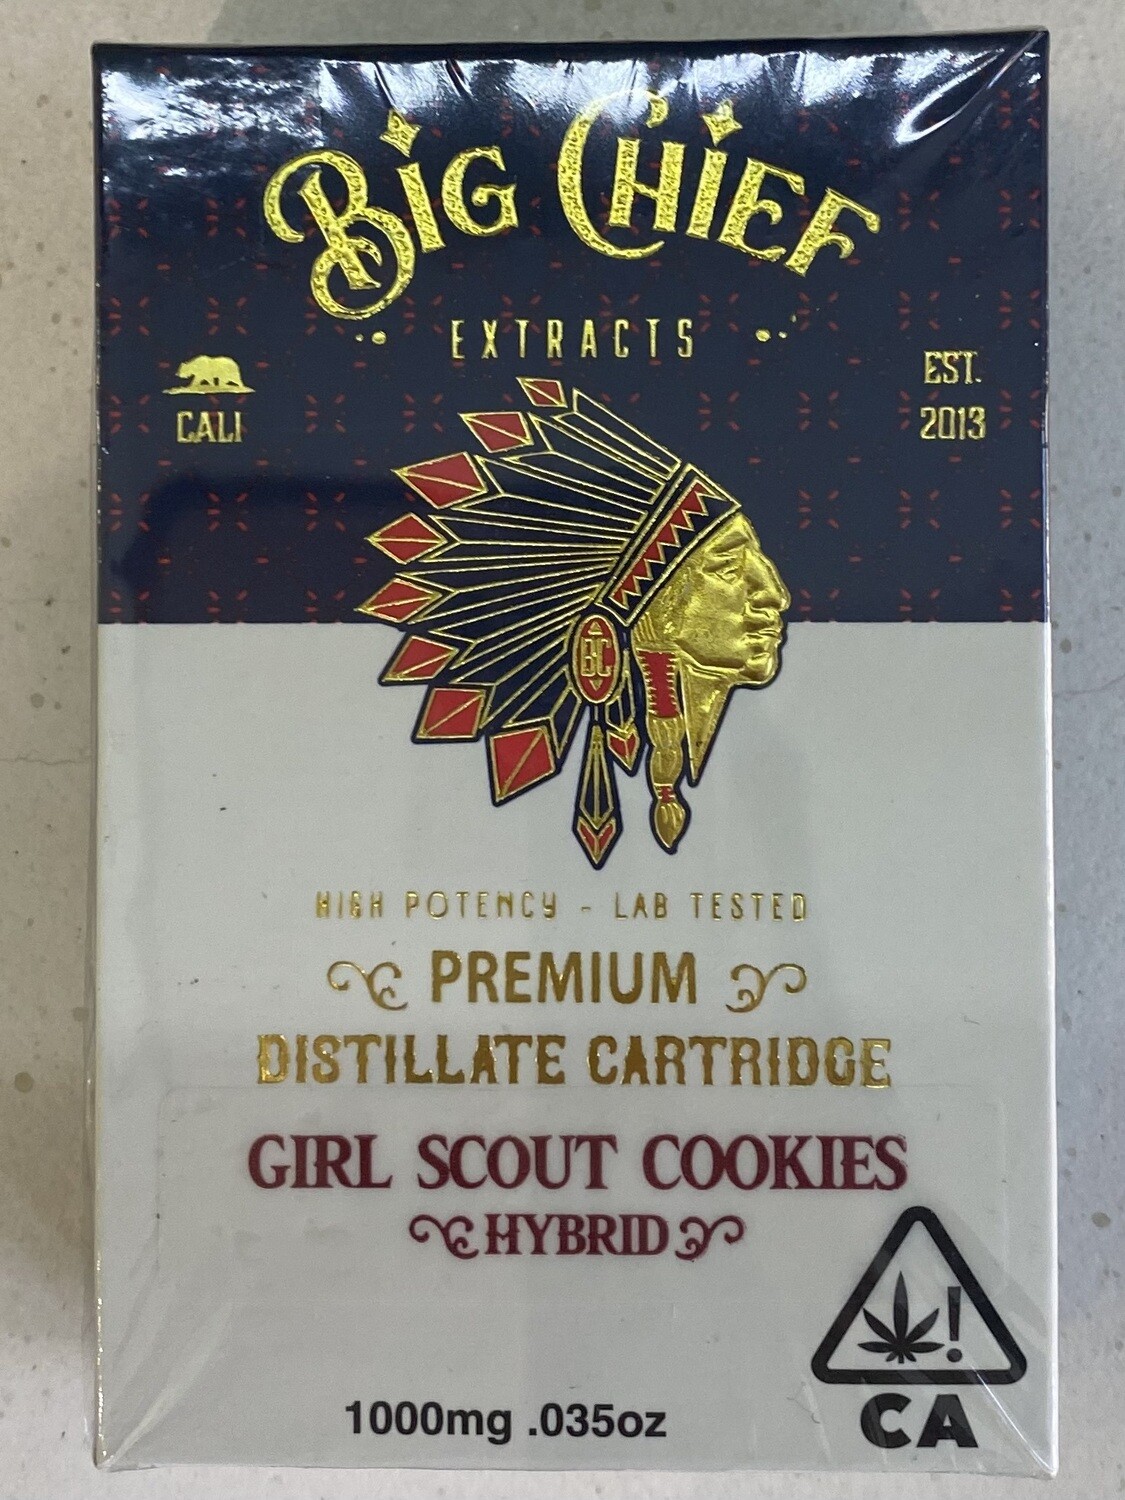 Big Chief Cartridge - Optional Cannabis Gift (Legal Coupon purchase)